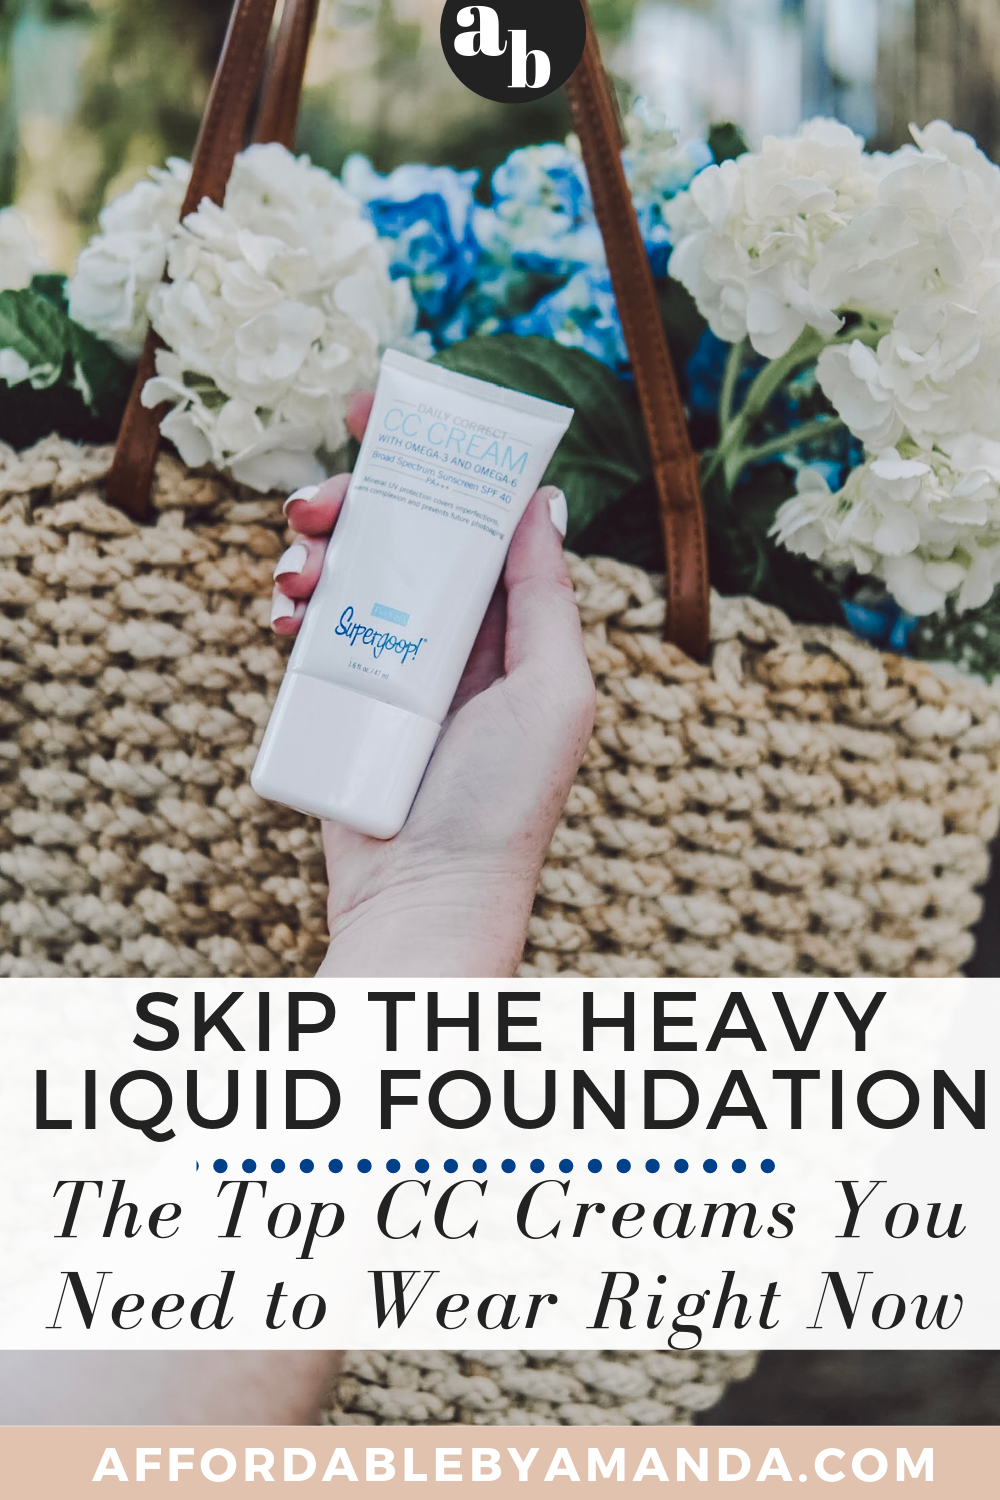 cc creams you need to wear right now. summer makeup trends. cc creams for all skin types.